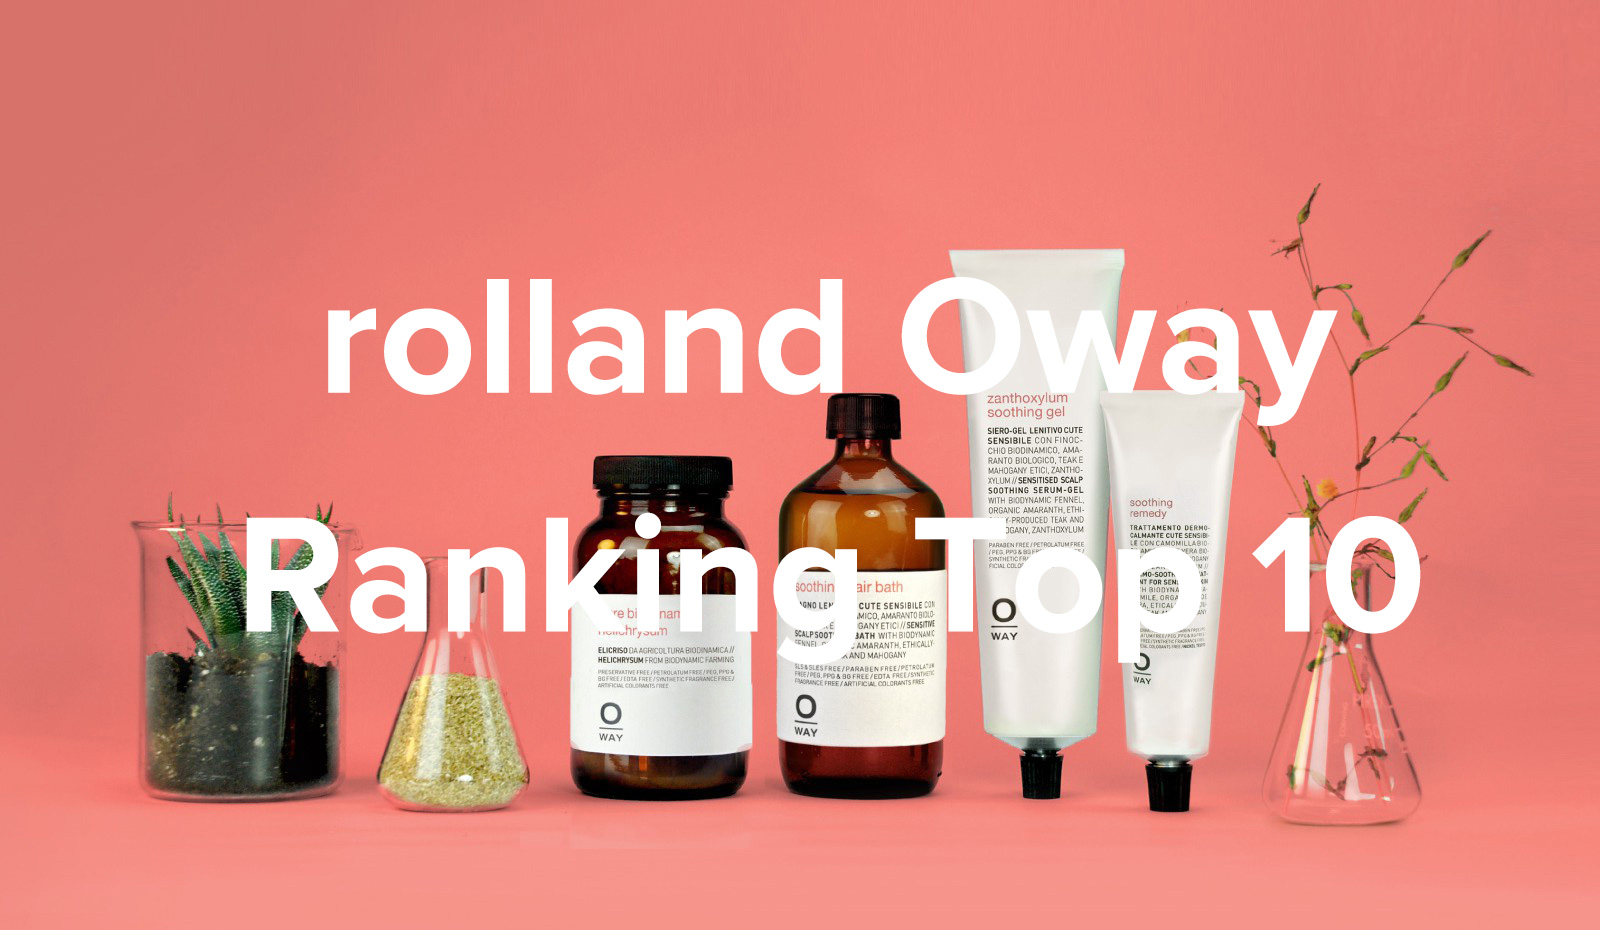 rolland oway ランキングトップ10